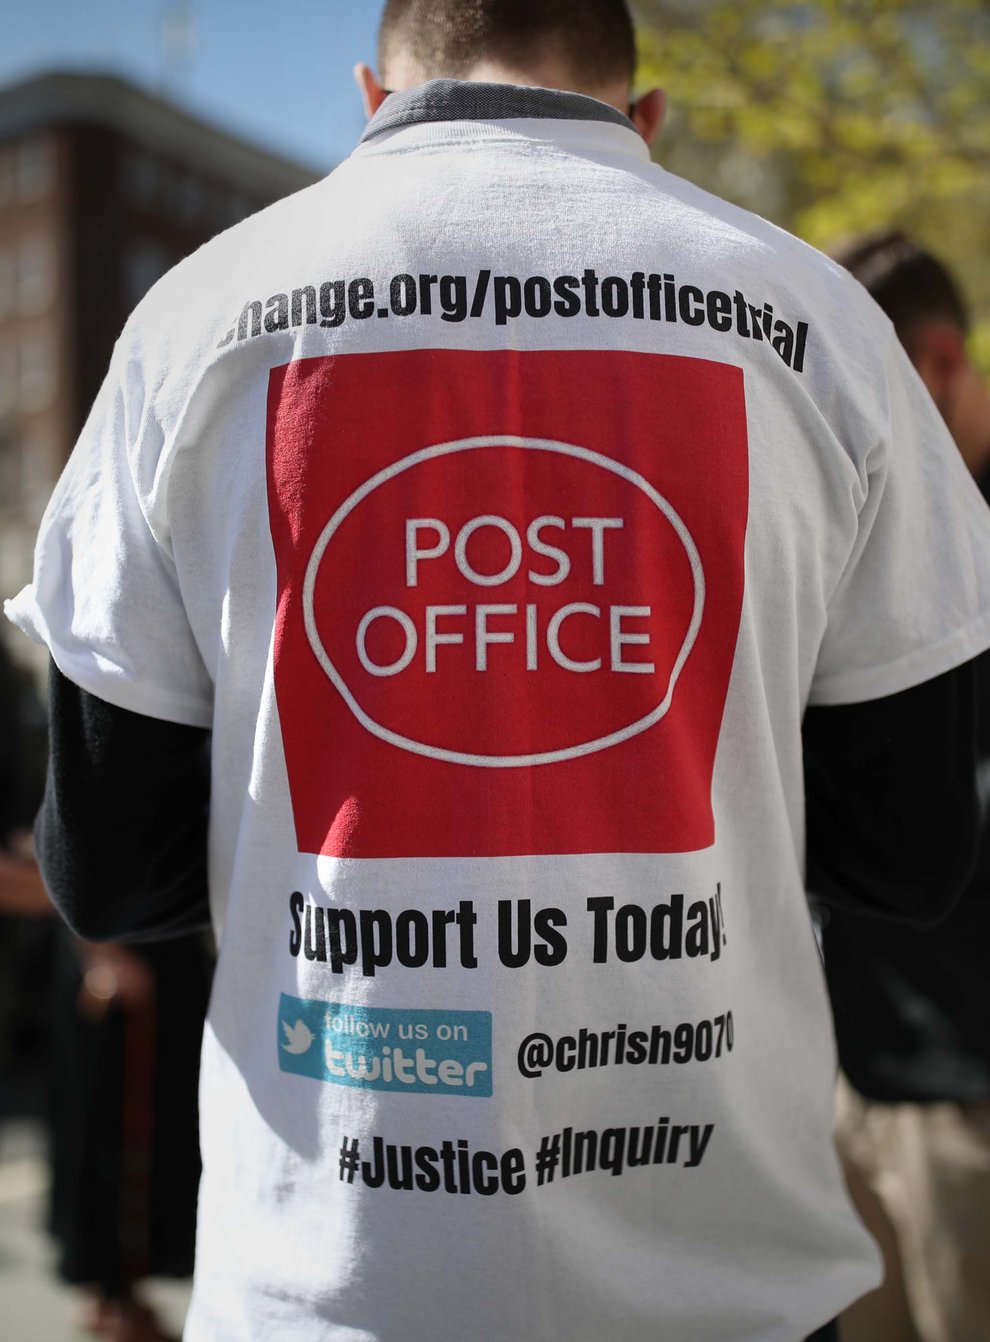 Post Office bosses who profited during the false accounting scandal linked to a flawed computer system should be forced to apologise and pay back their lucrative bonuses, according to former postmasters whose lives have been ‘ruined’ by the affair (Yui Mok/PA)